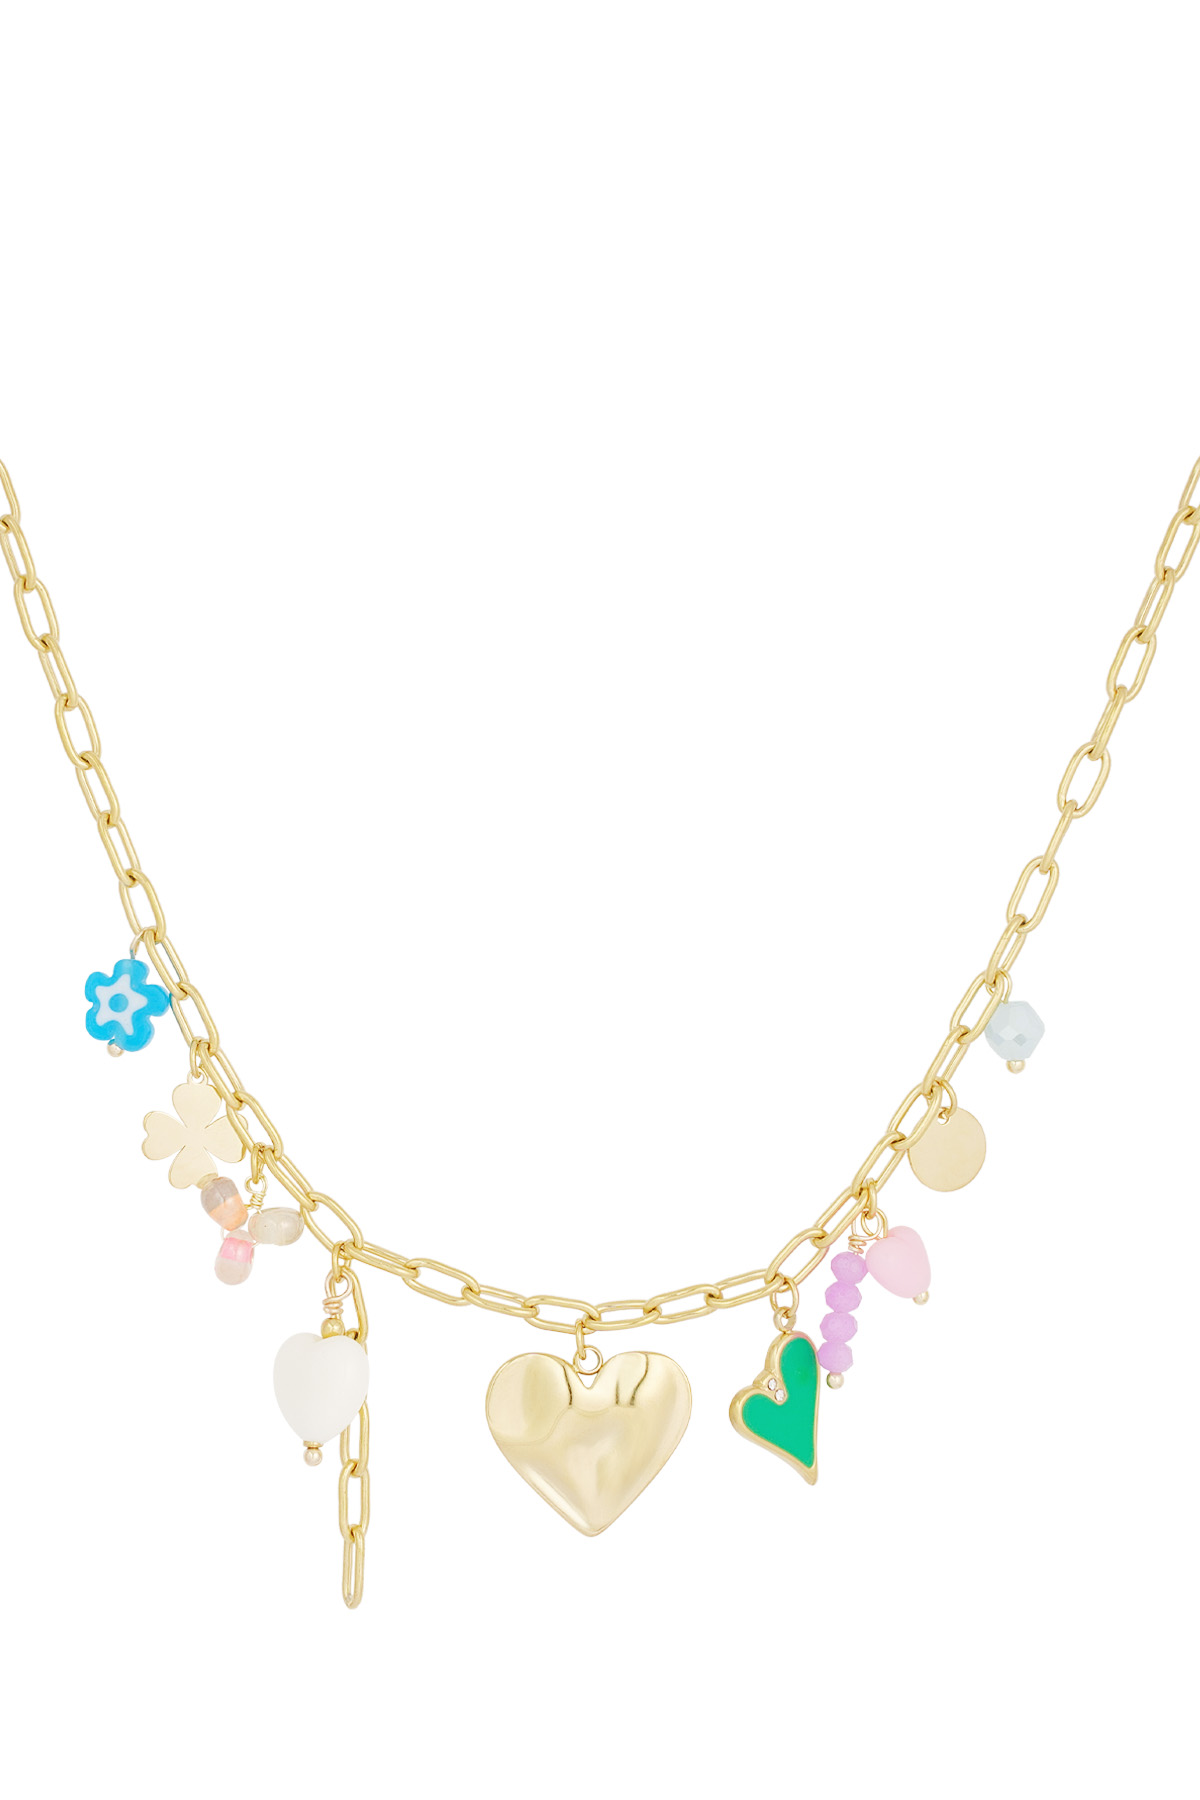 charm necklace with colored charms - gold